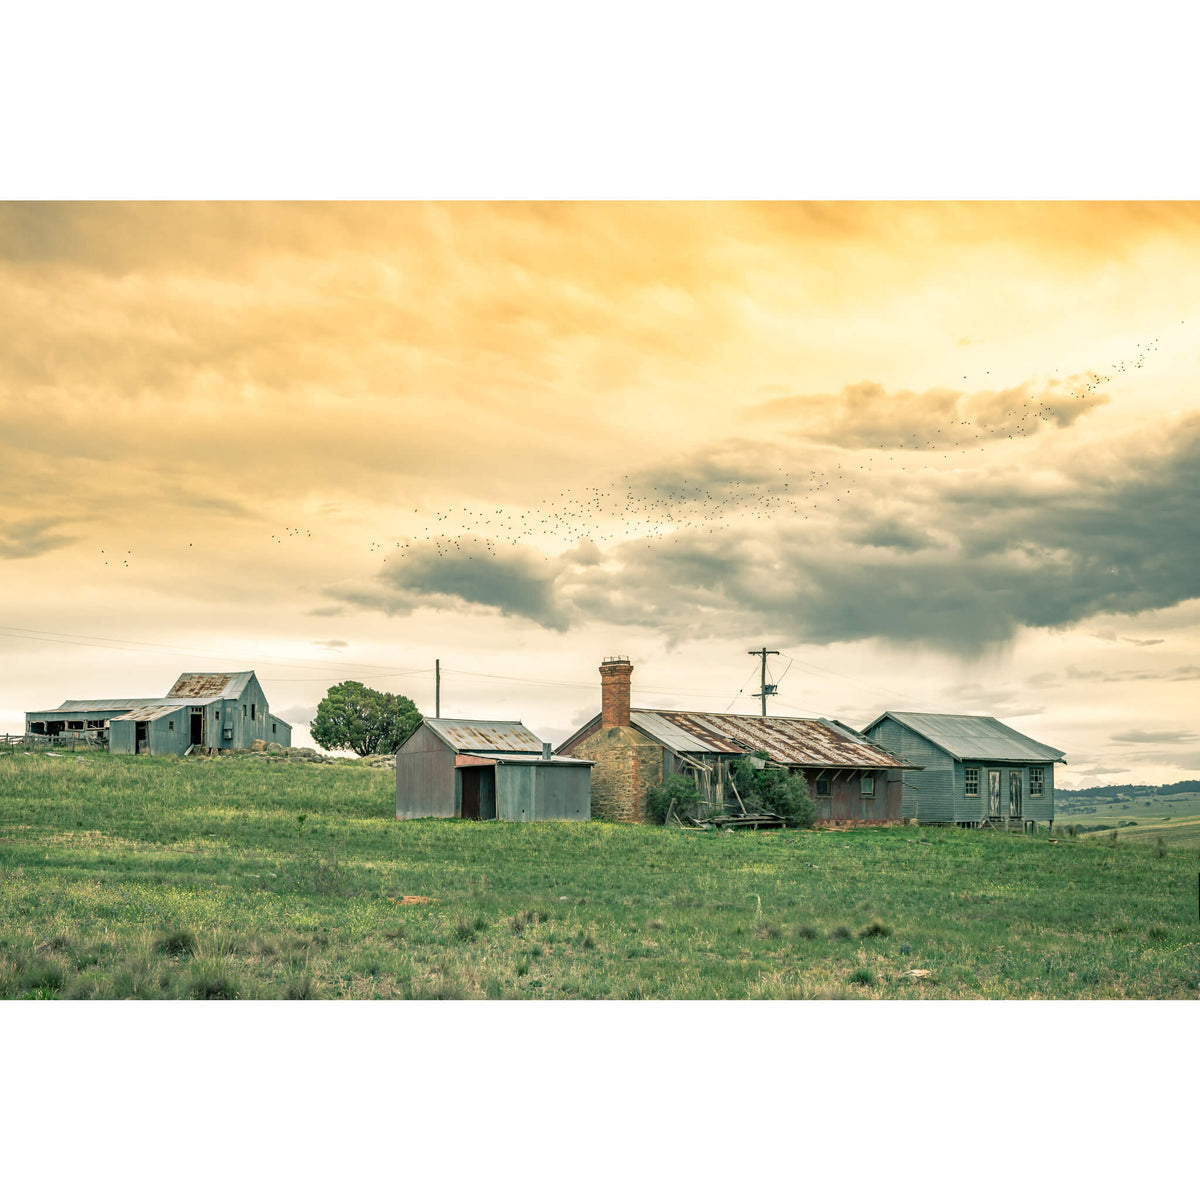 Numbla Vale Cottages &amp; Woolshed | A Place To Call Home Fine Art Print - Lost Collective Shop